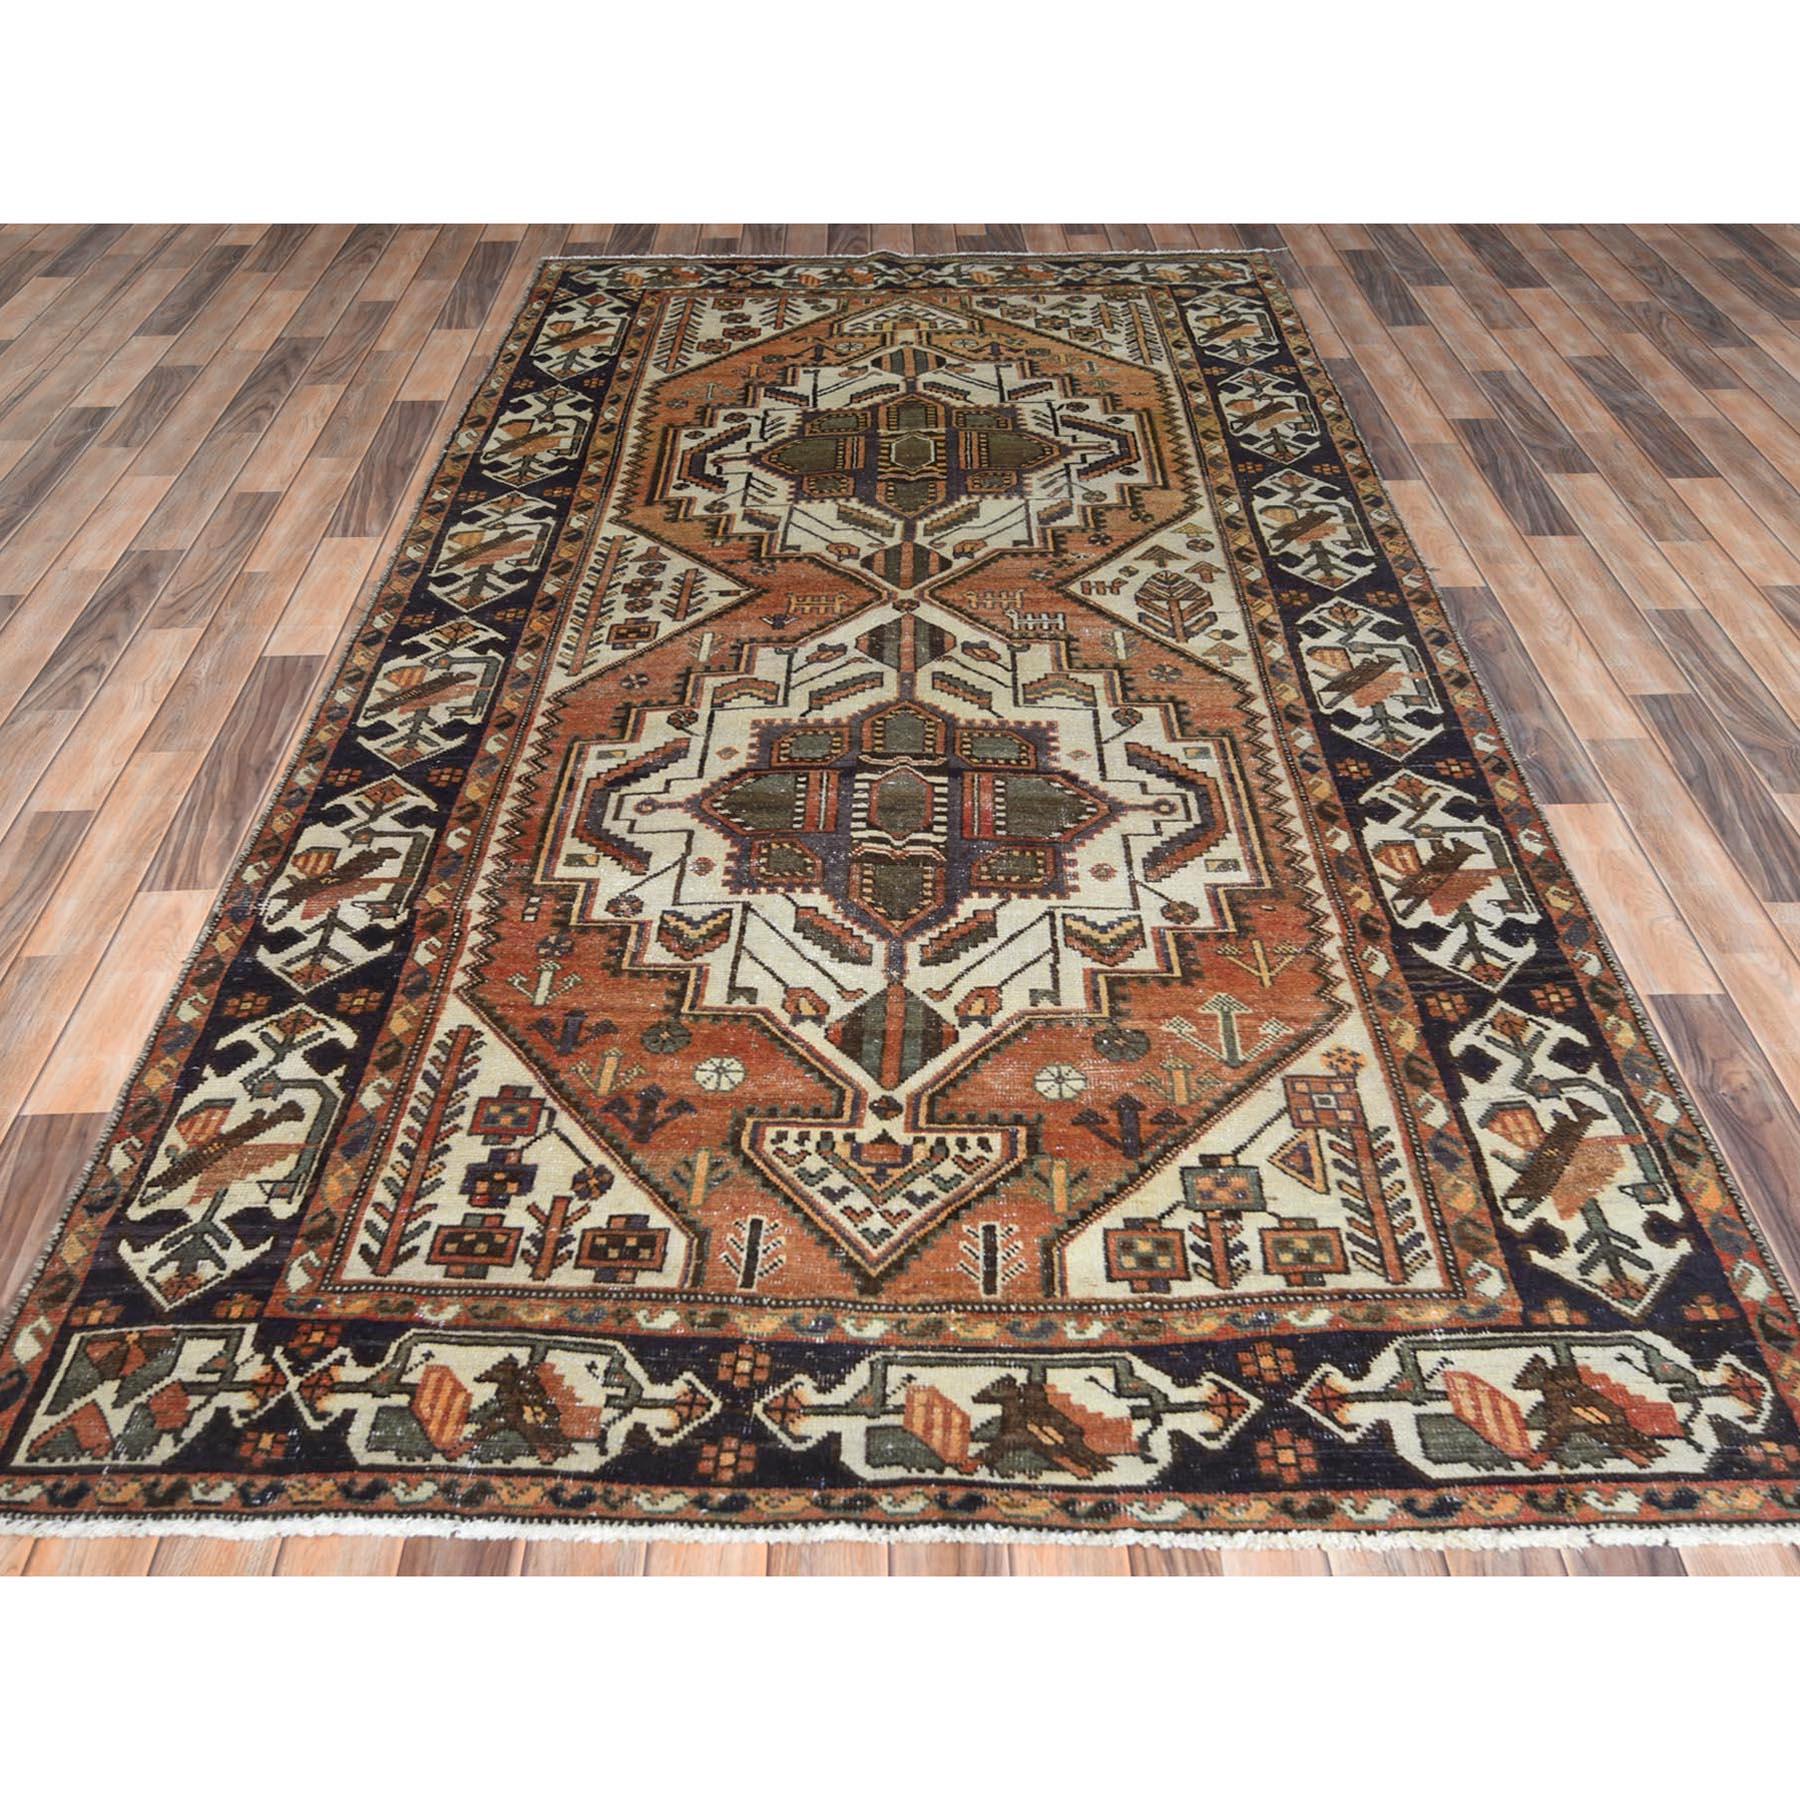 This fabulous Hand-Knotted carpet has been created and designed for extra strength and durability. This rug has been handcrafted for weeks in the traditional method that is used to make
Exact rug size in feet and inches : 5'3